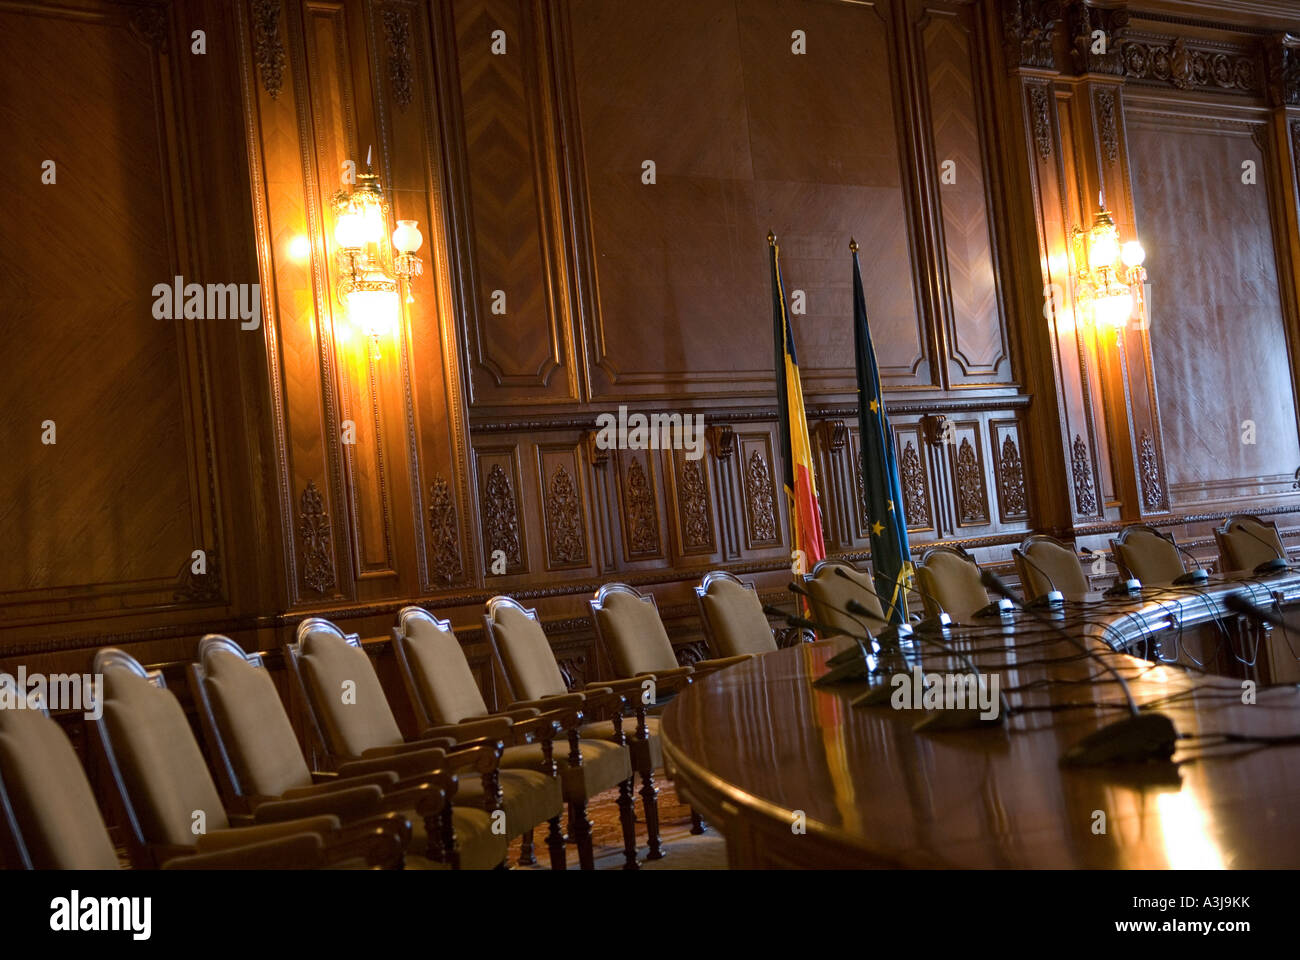 Interior view of The Palace of the Parliament (Palatul Parlamentului) in Bucharest, Romania Stock Photo